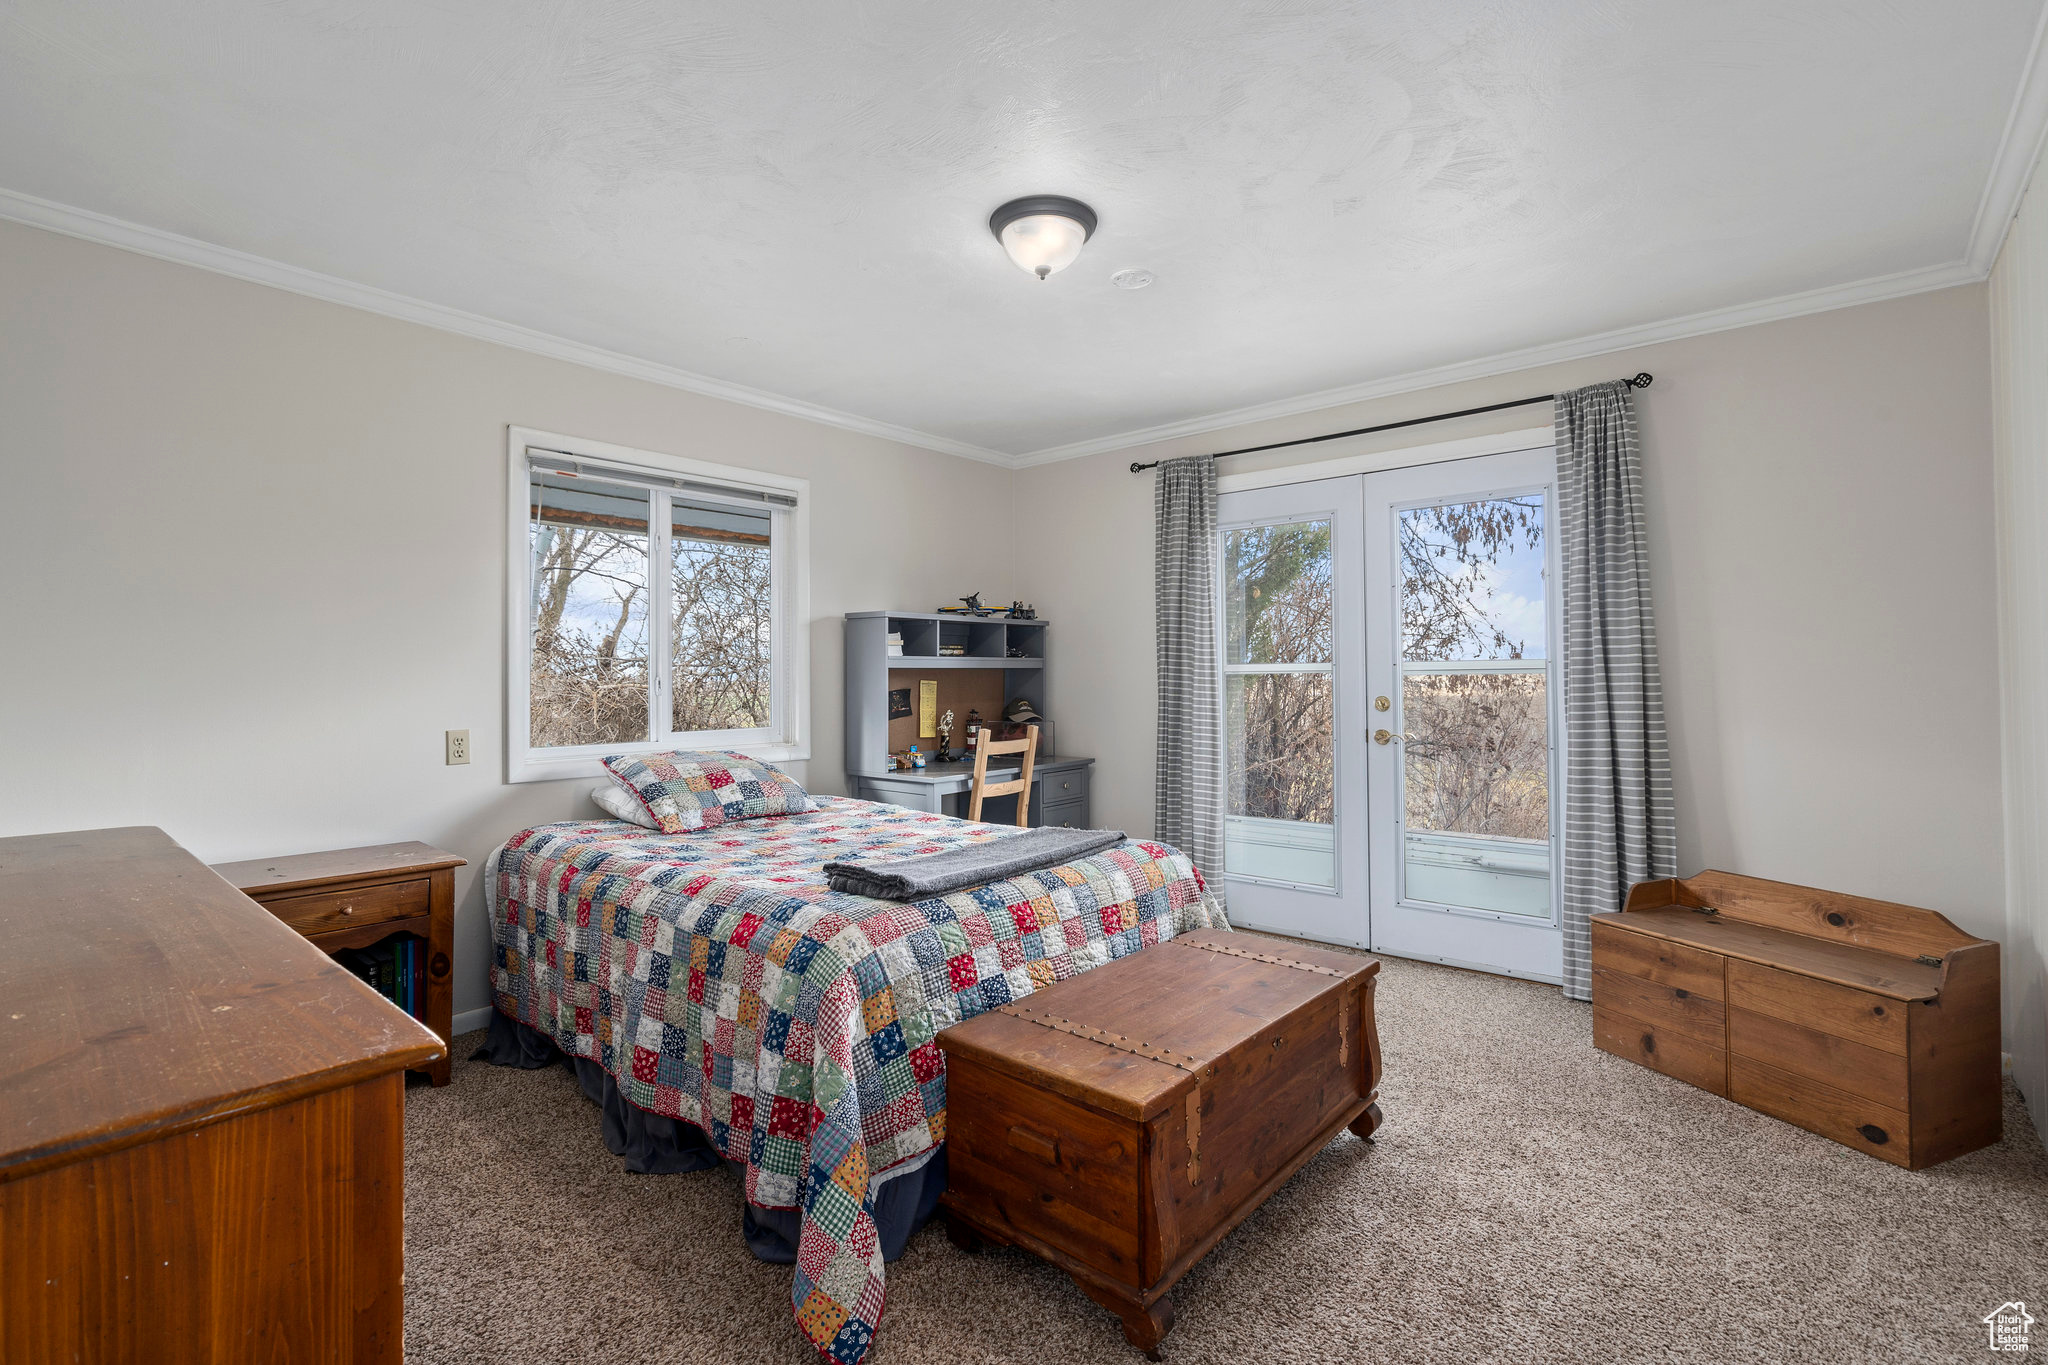 Bedroom with access to exterior, crown molding, light colored carpet, and french doors that open onto Trex deck on the north side of the home overlooking the riverbottoms area.